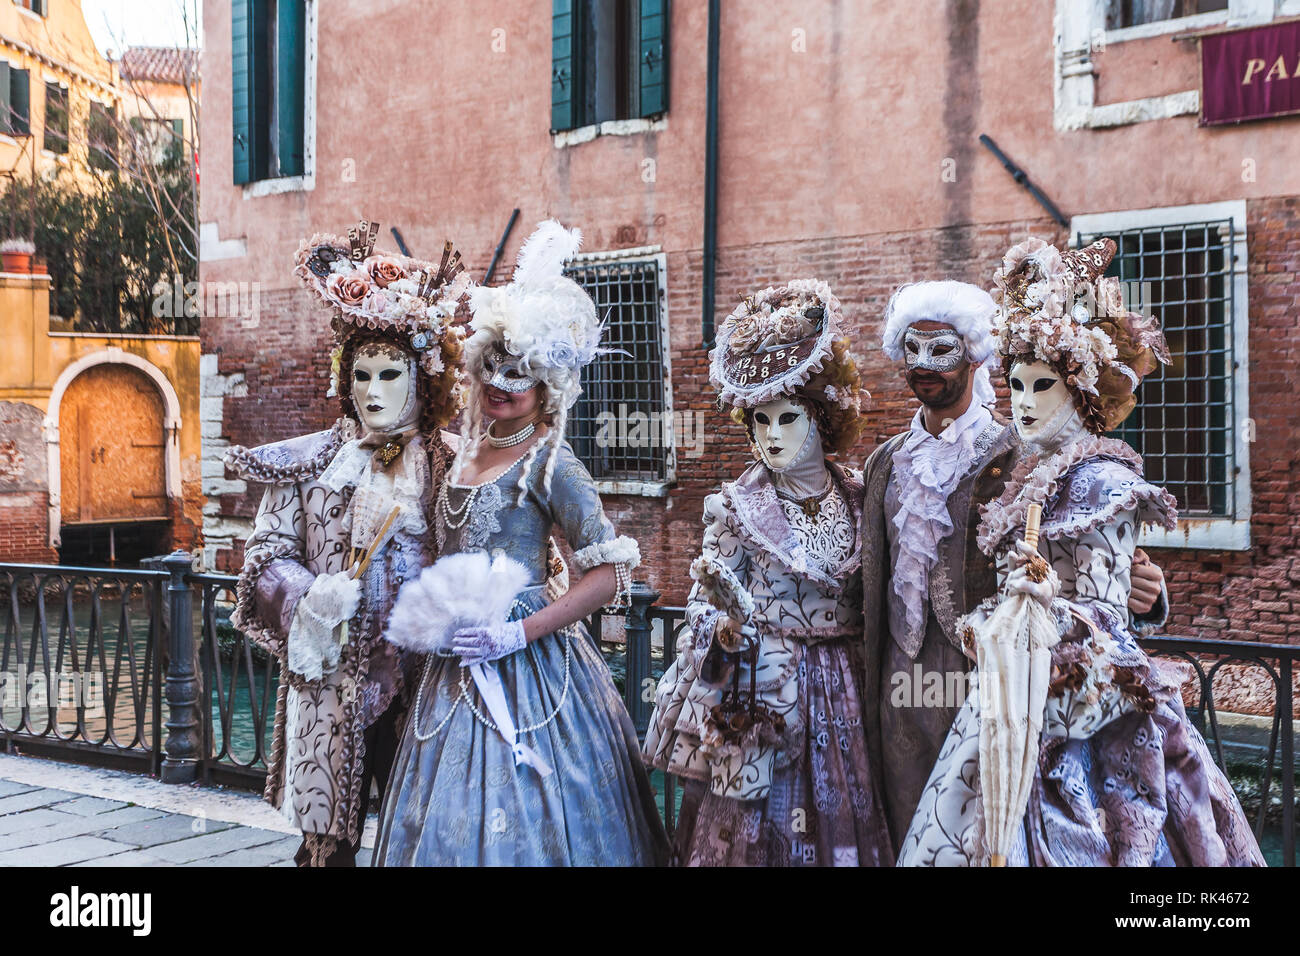 VENICE, ITALY - FEBRUARY 10 2018: Five hundred dressed carnival masks posing for photographers Stock Photo